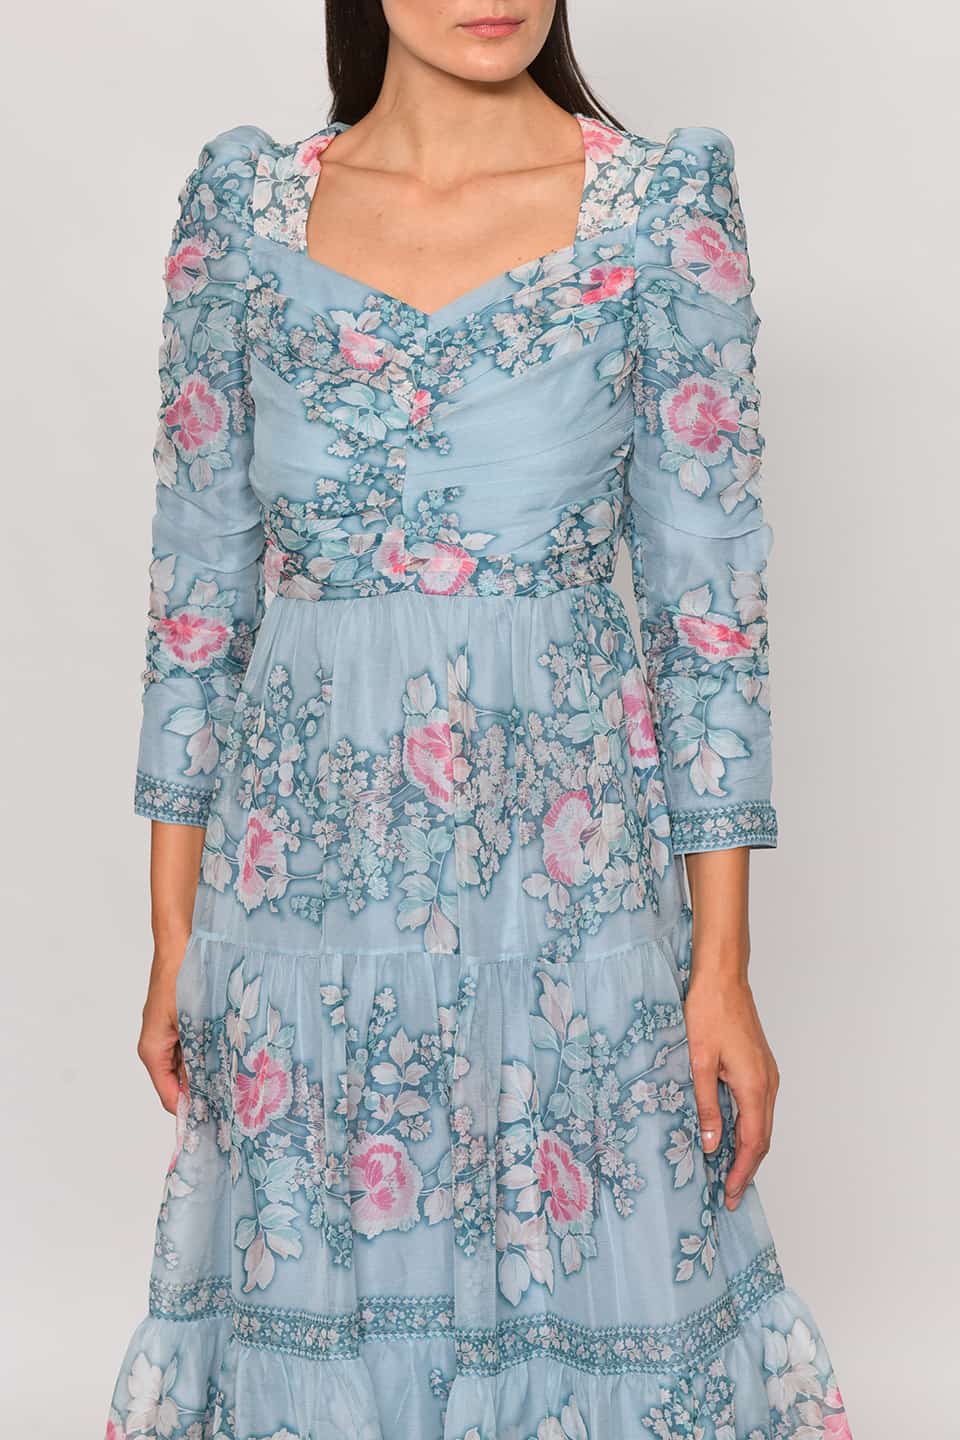 Model wearing floral print silk chiffon tiered long dress in a pale blue color from stylist Vilshenho, front details